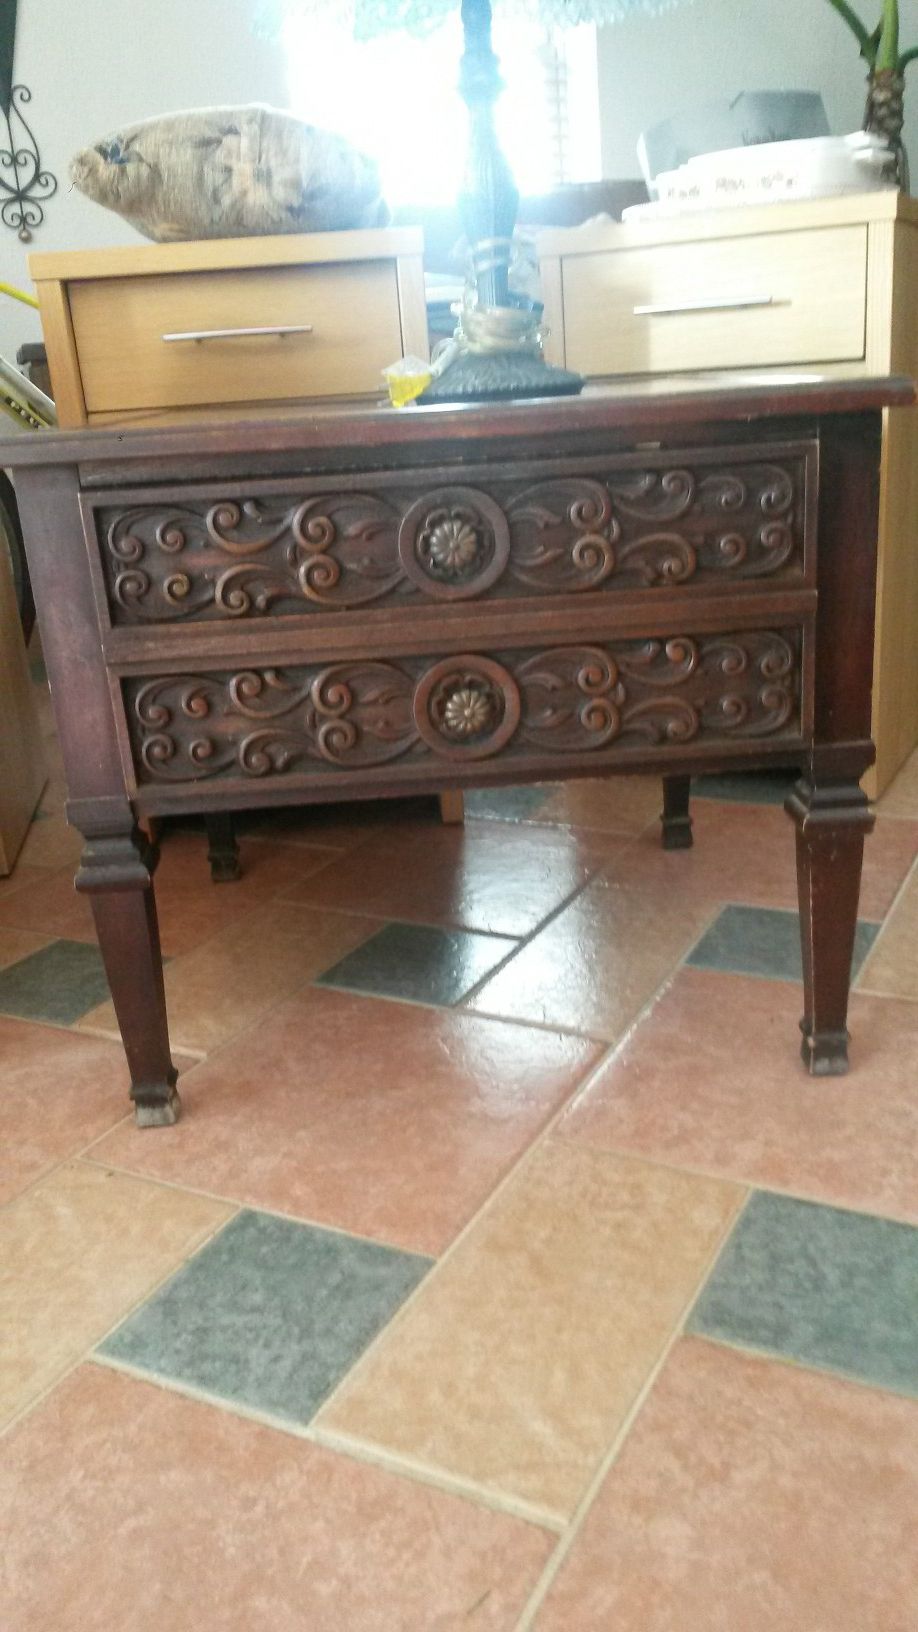 Gorgeous solid cherry wood end table